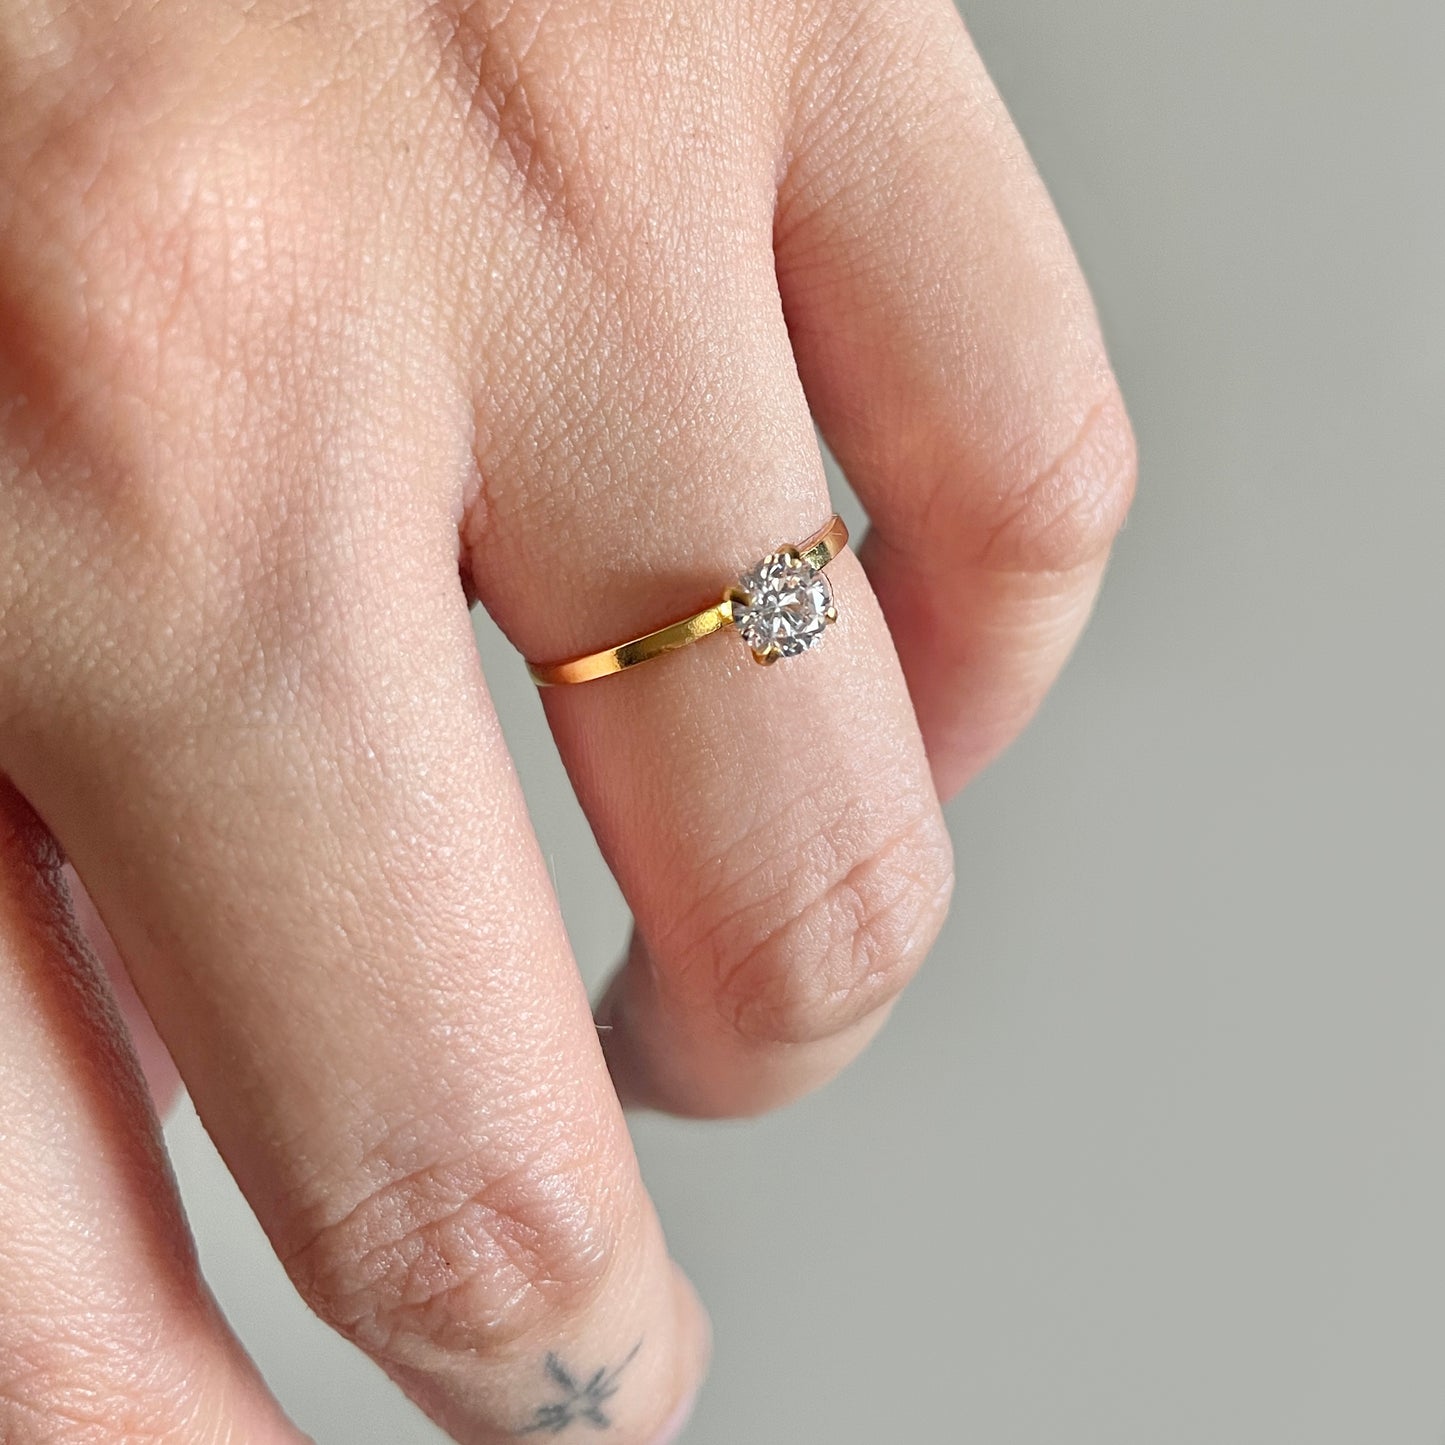 The Skinny Solitaire Ring in Solid Gold